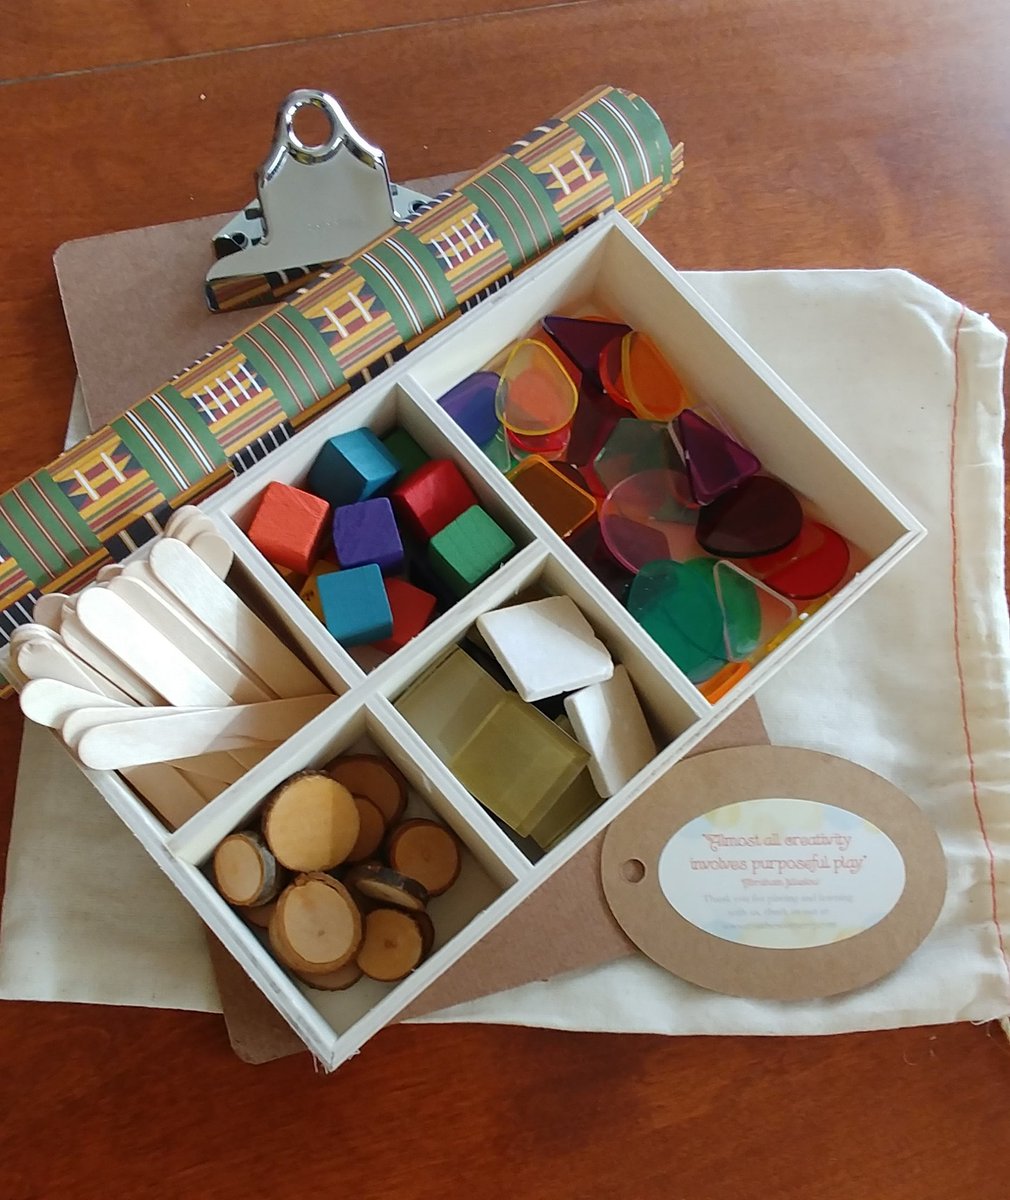 The best thing about today's workshops put on by @CoachesCornerEY was the learning, this start-up kit of loose parts was an added bonus. Thank you @albrown_tdsb @a_thompsonclass @booklamations #math #literacy #playingislearning